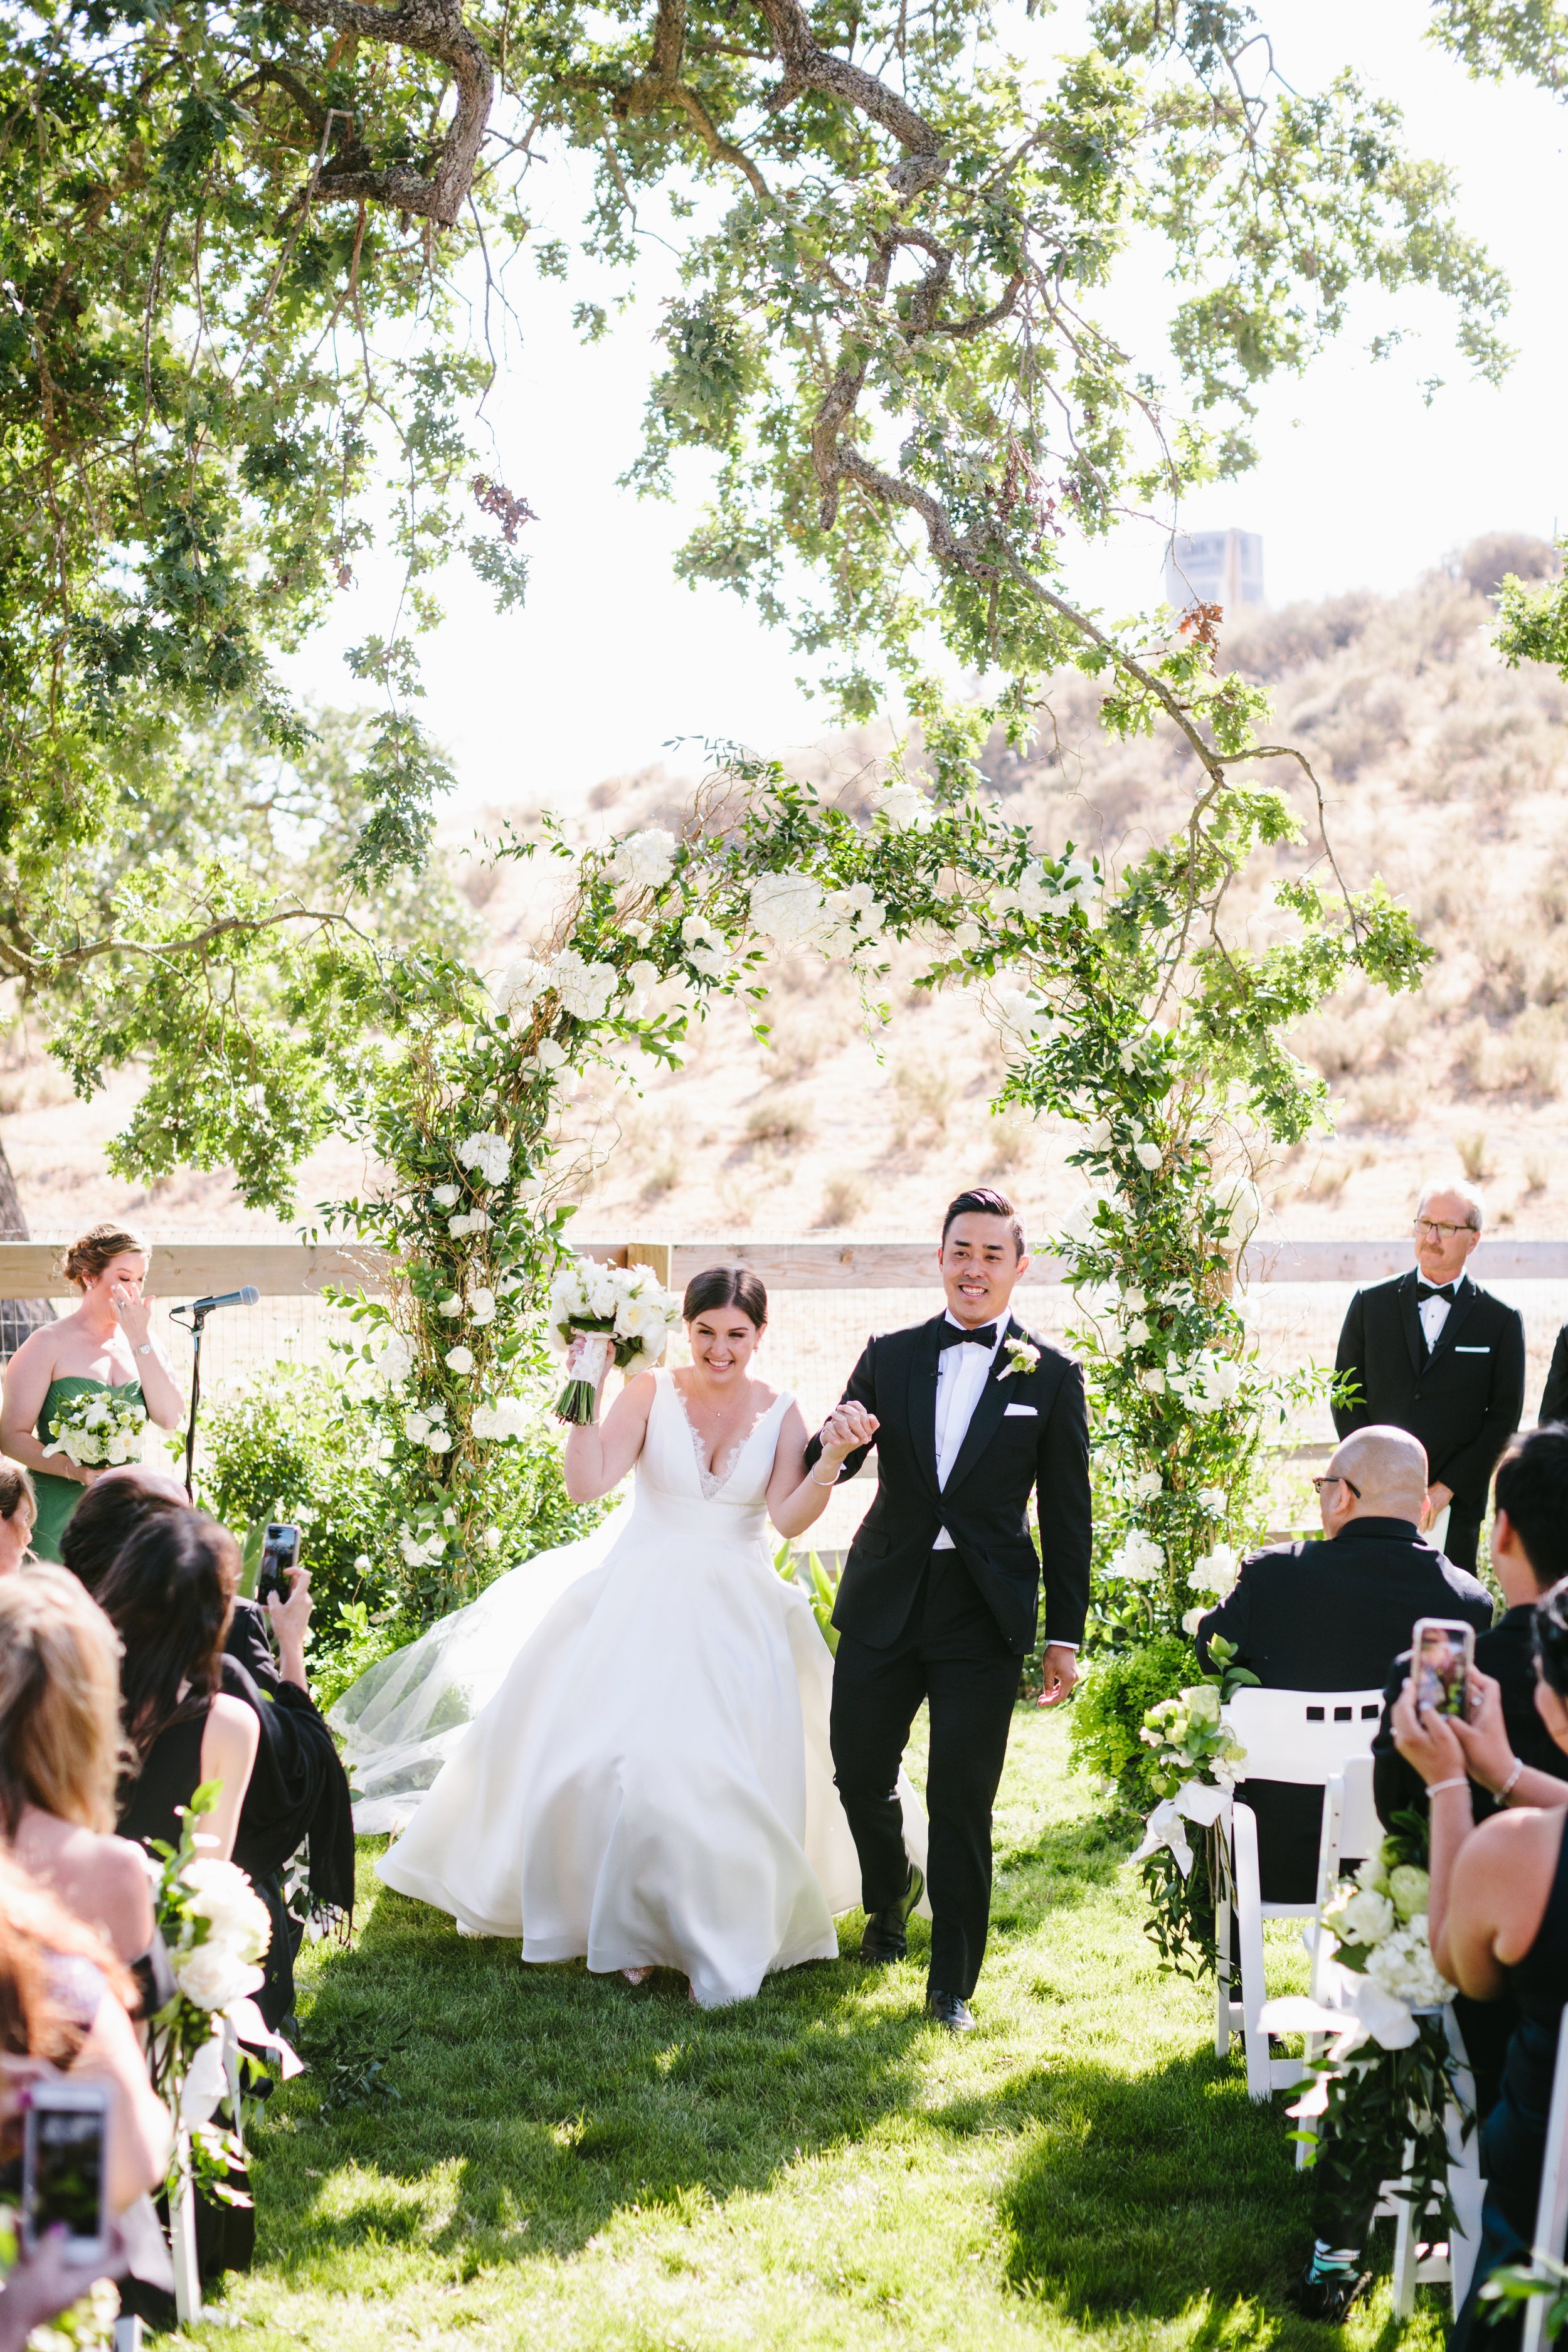 www.santabarbarawedding.com | Foxen Canyon Ranch | Jodee Debes Photography | LVL Weddings |   Jerry Palmer Flowers | Bright Event Rentals | The Society Band | Couple Leaving the Ceremony